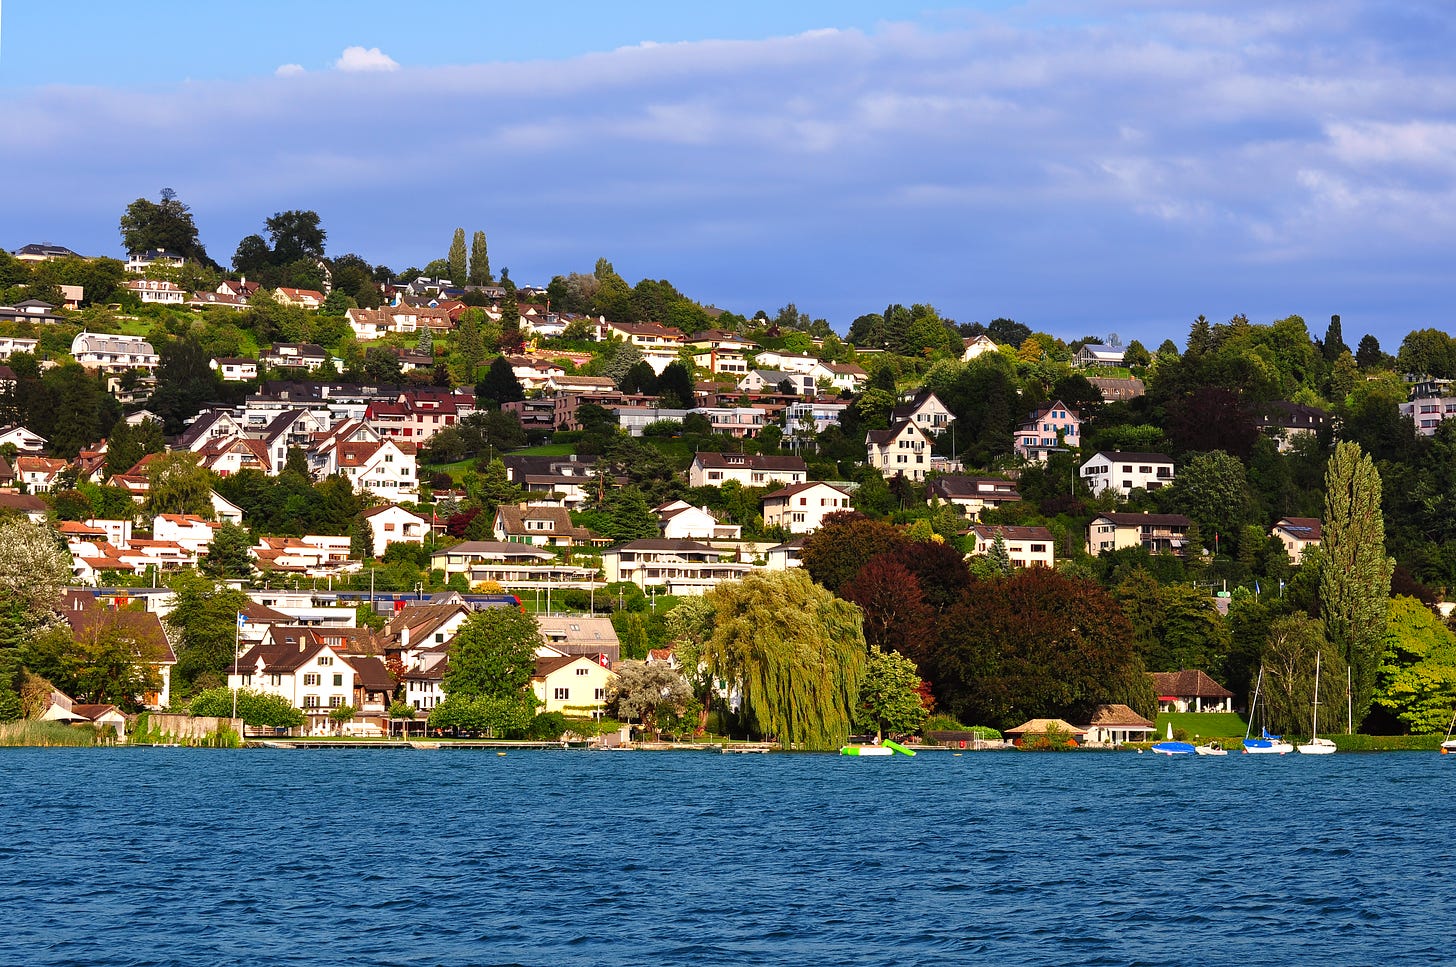 The Zürich suburb of Erlenbach, as seen from the lake.